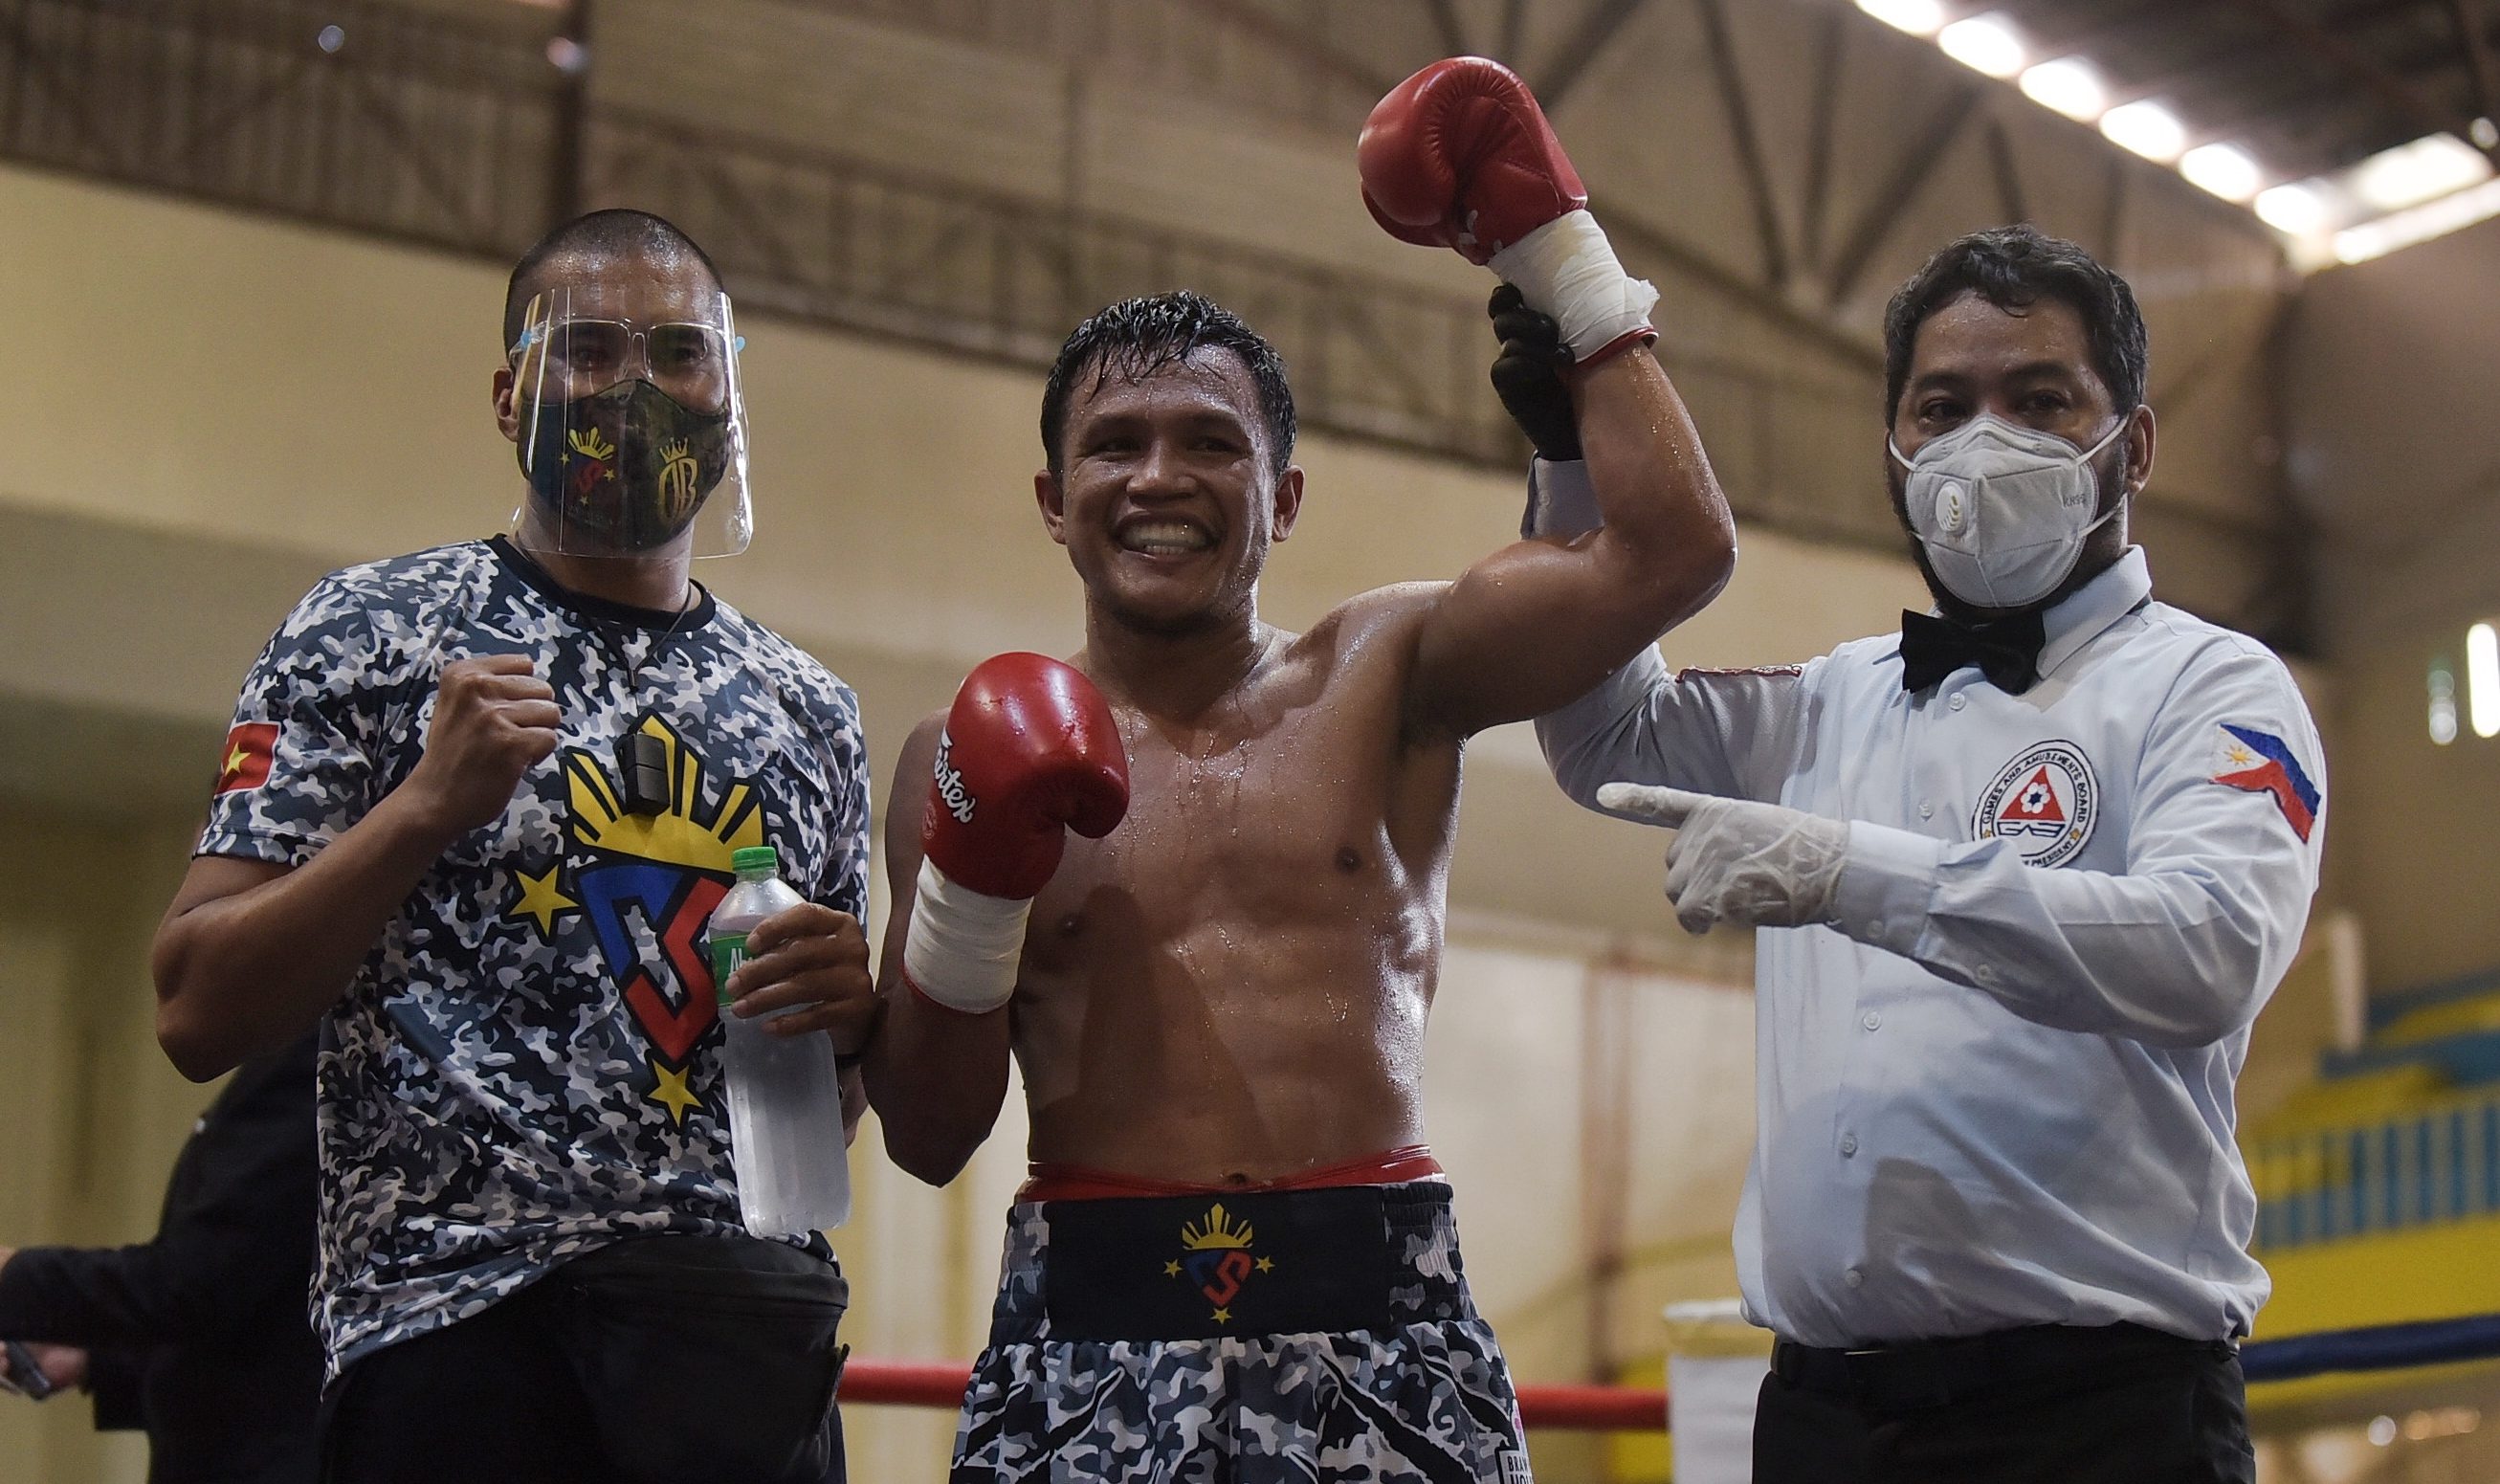 Charly Suarez knocks out Lorence Rosas in 4th round